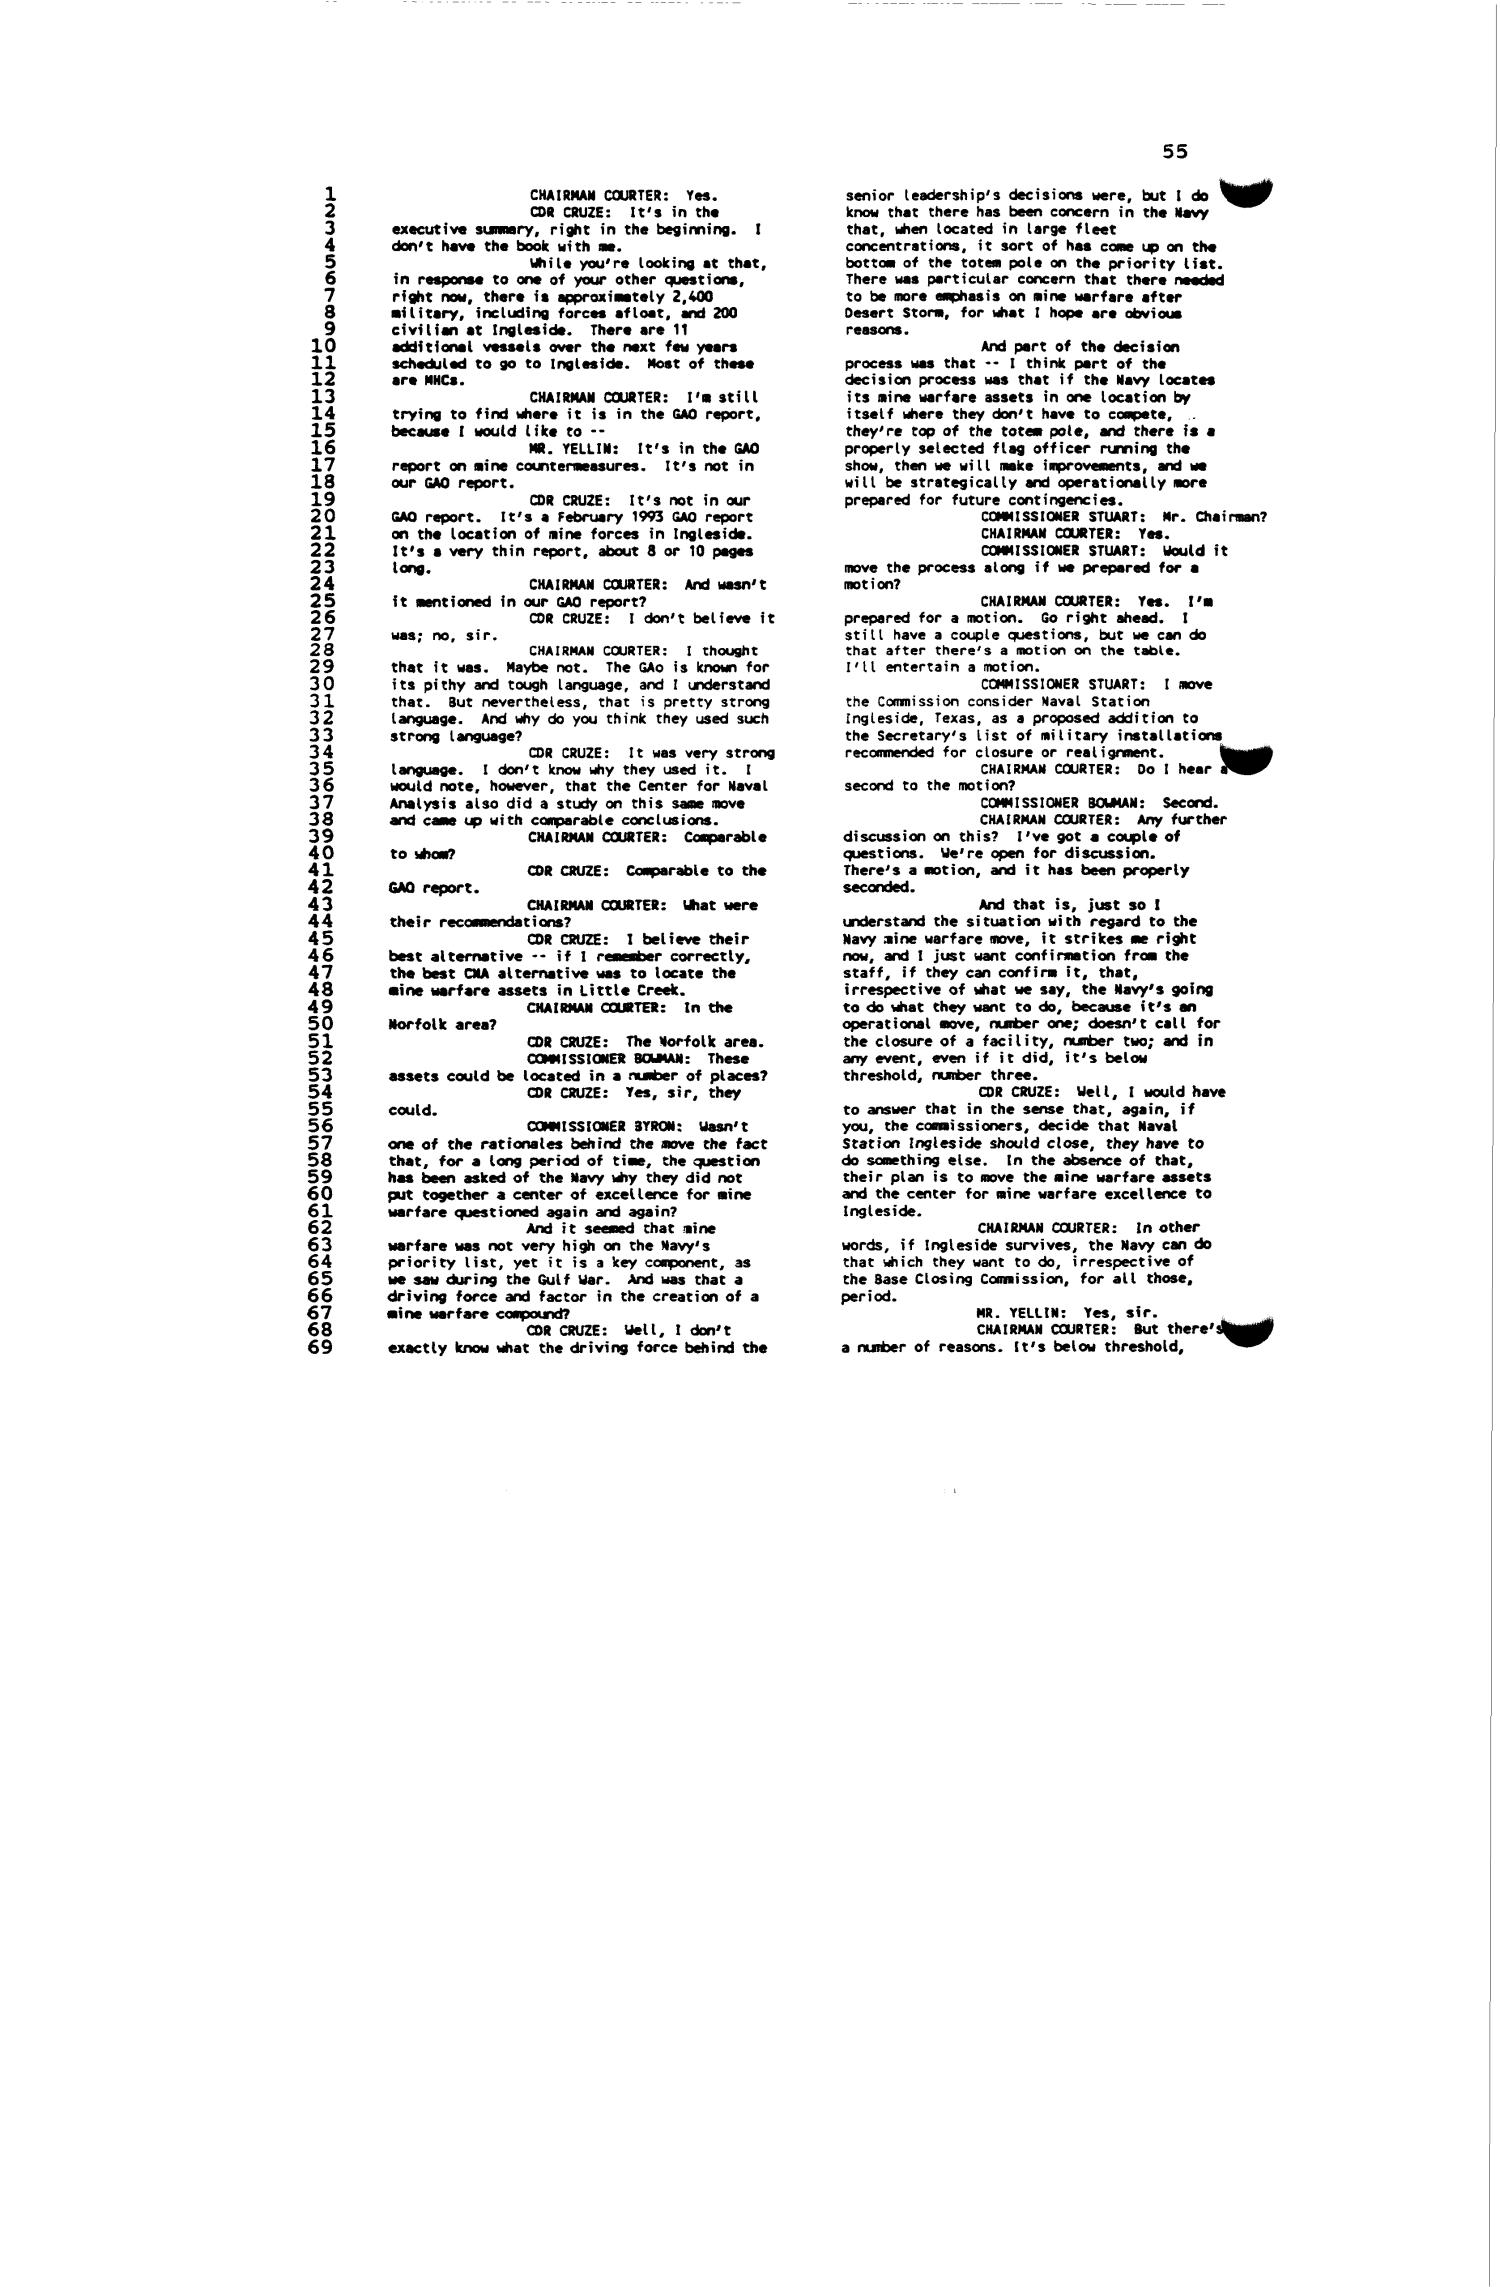 1995 Army Team Lead Desk Material - Adds to List Hearing, May 21, 1993
                                                
                                                    [Sequence #]: 58 of 222
                                                